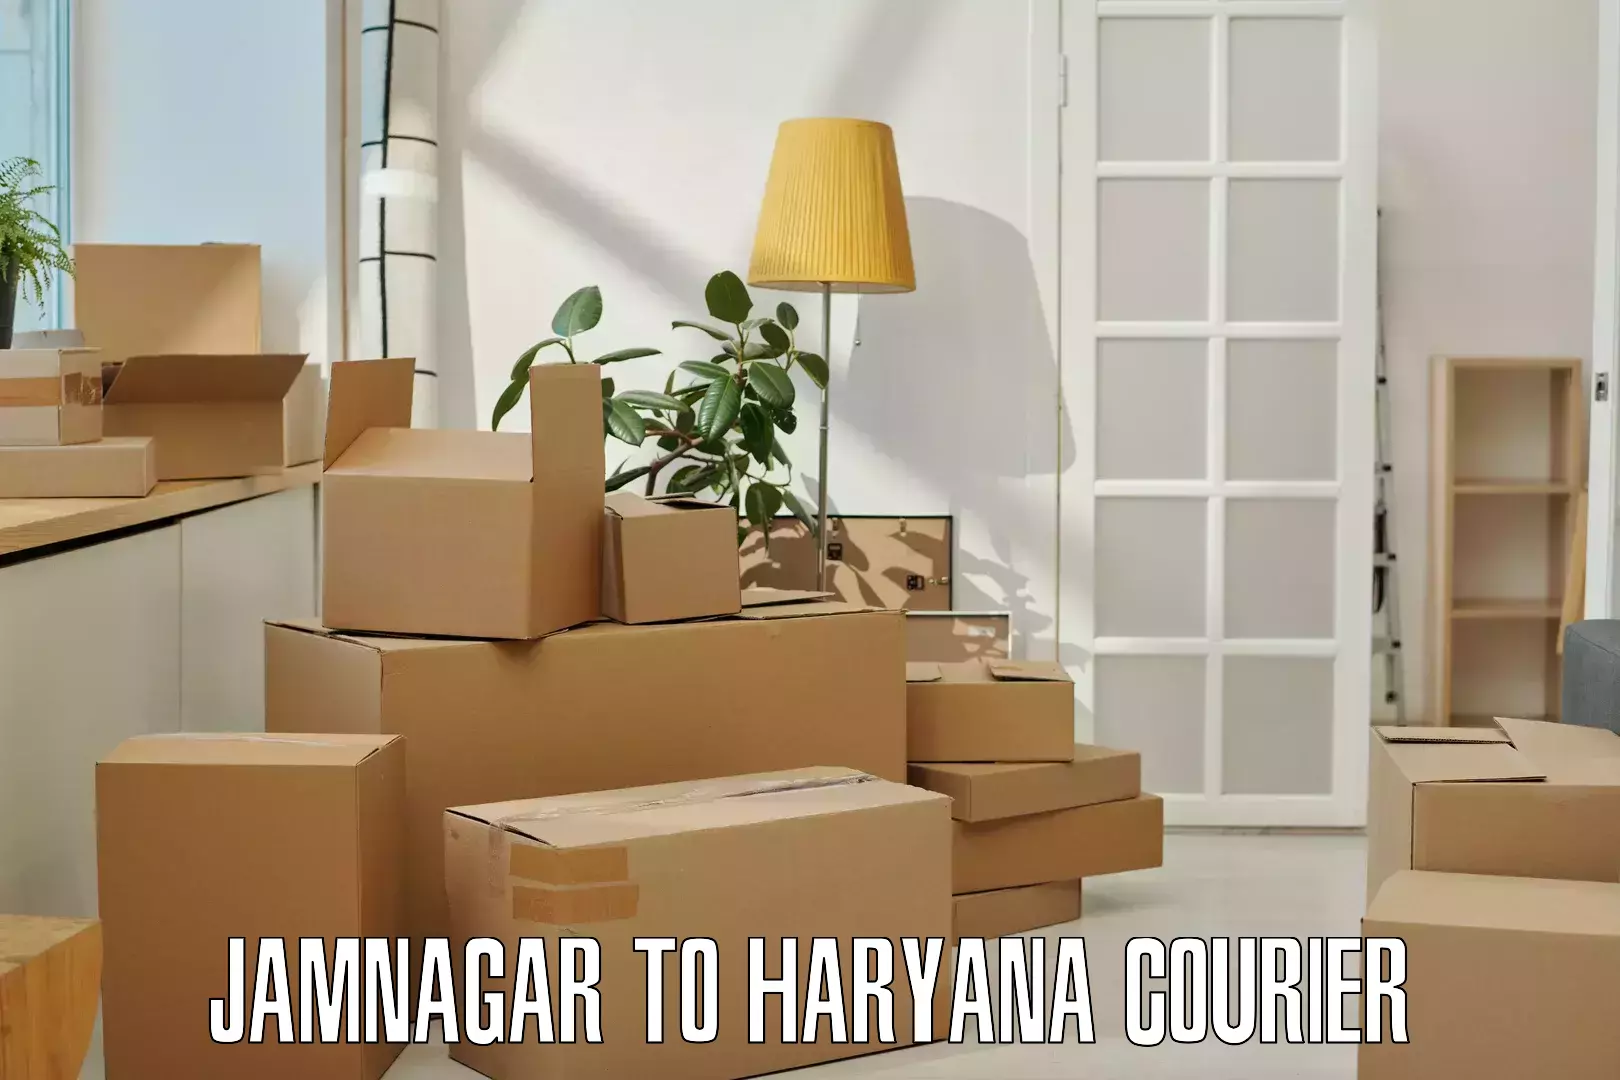 End-to-end delivery Jamnagar to Haryana